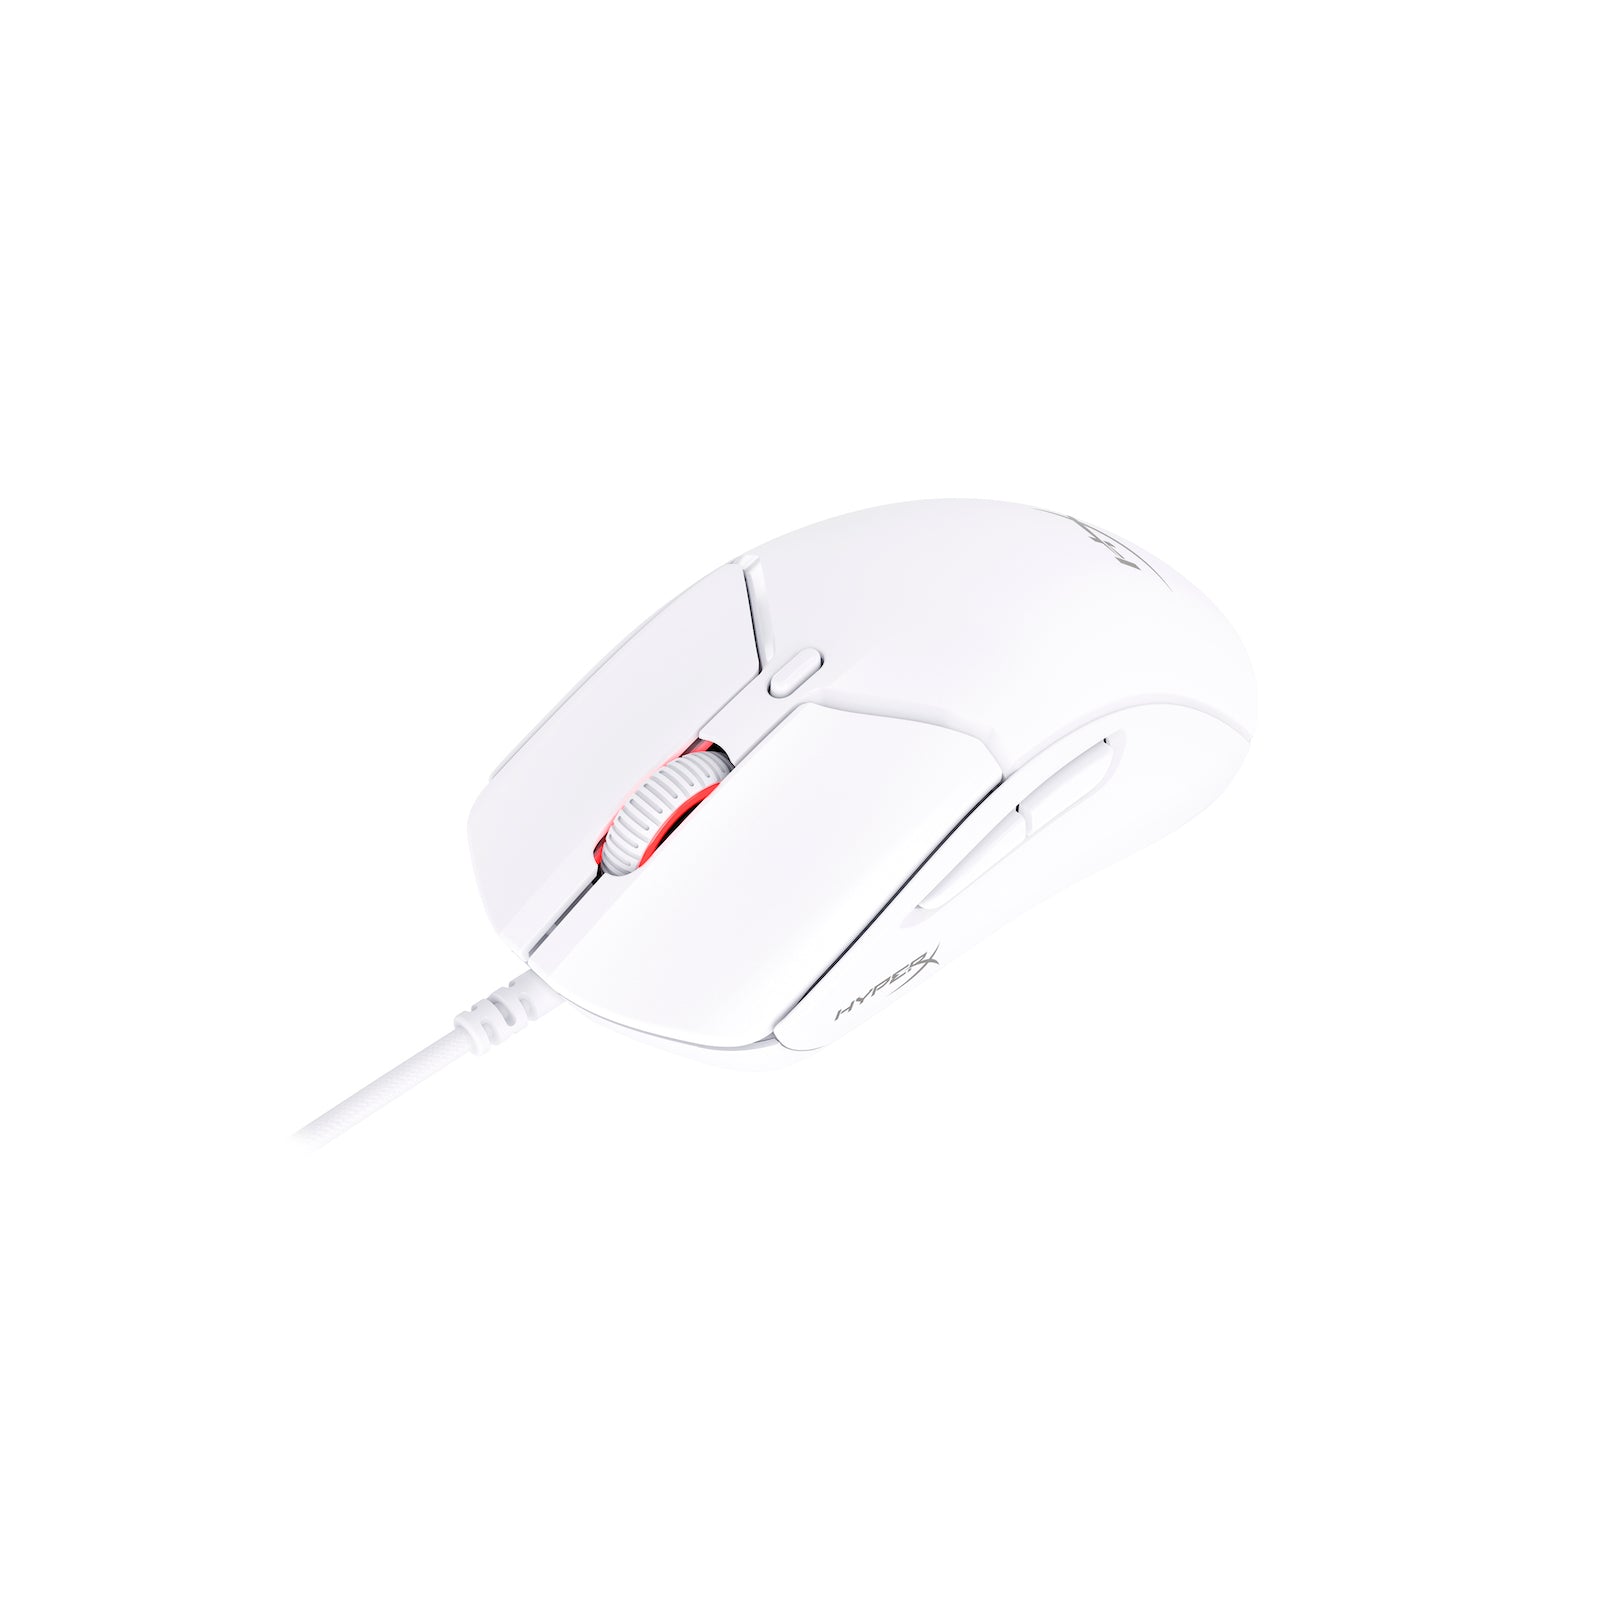 HyperX Pulsefire Haste 2 | Gaming Mouse